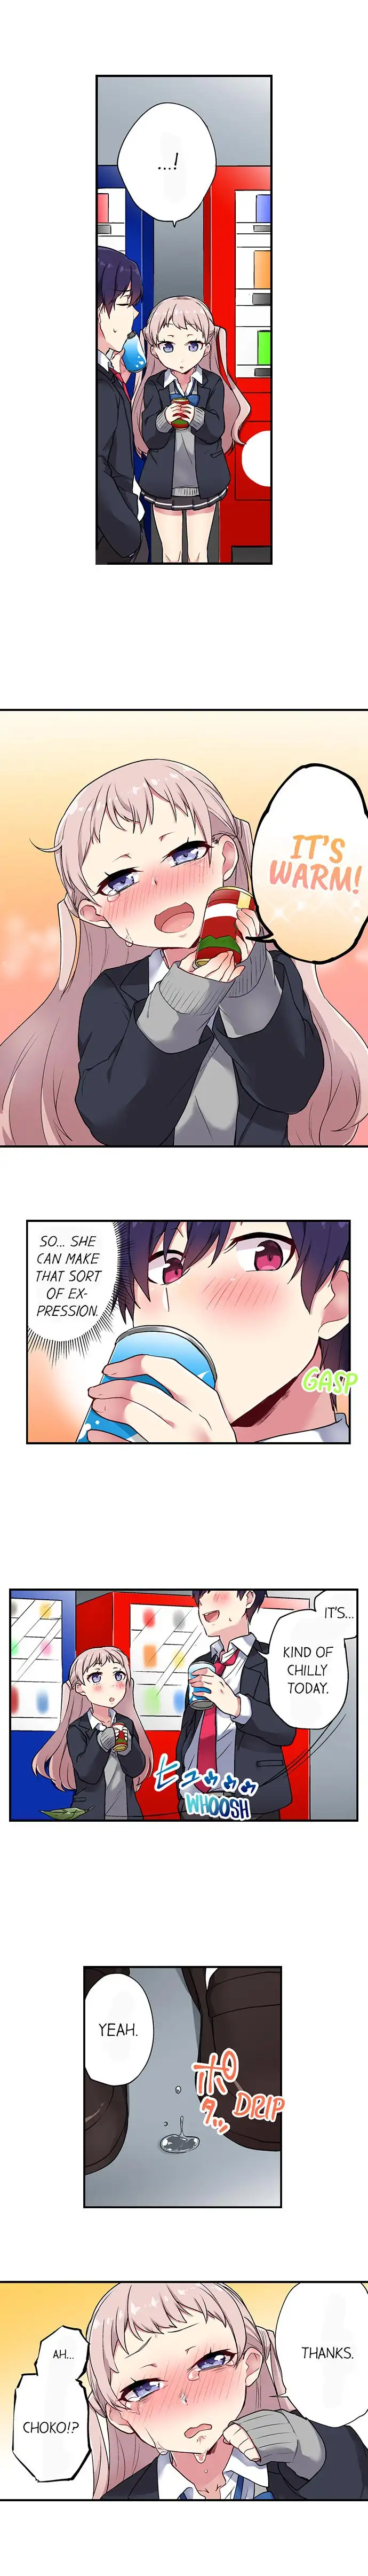 Committee Chairman, Didn’t You Just Masturbate In the Bathroom? I Can See the Number of Times People Orgasm - Chapter 31 Page 4